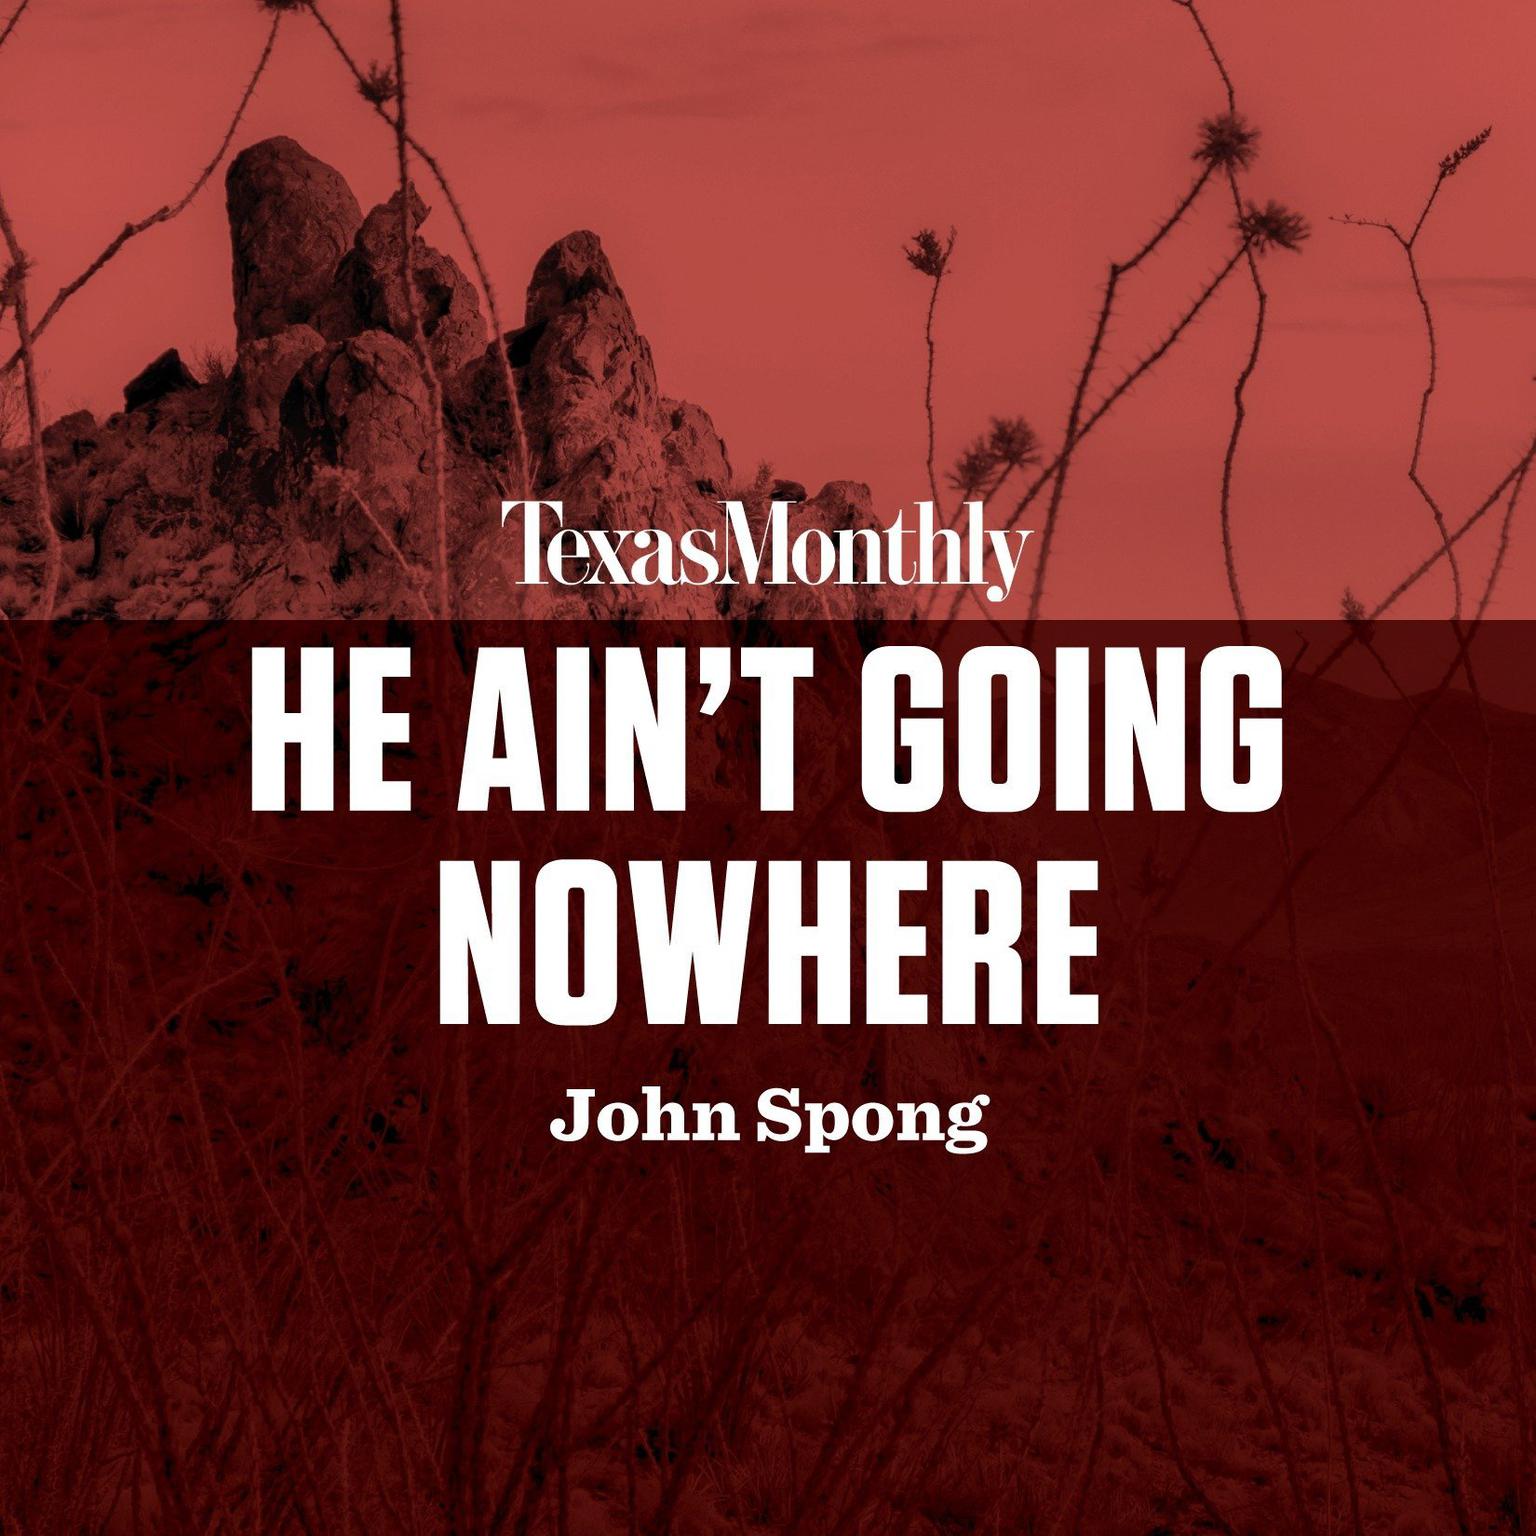 He Aint Going Nowhere Audiobook, by John Shelby Spong